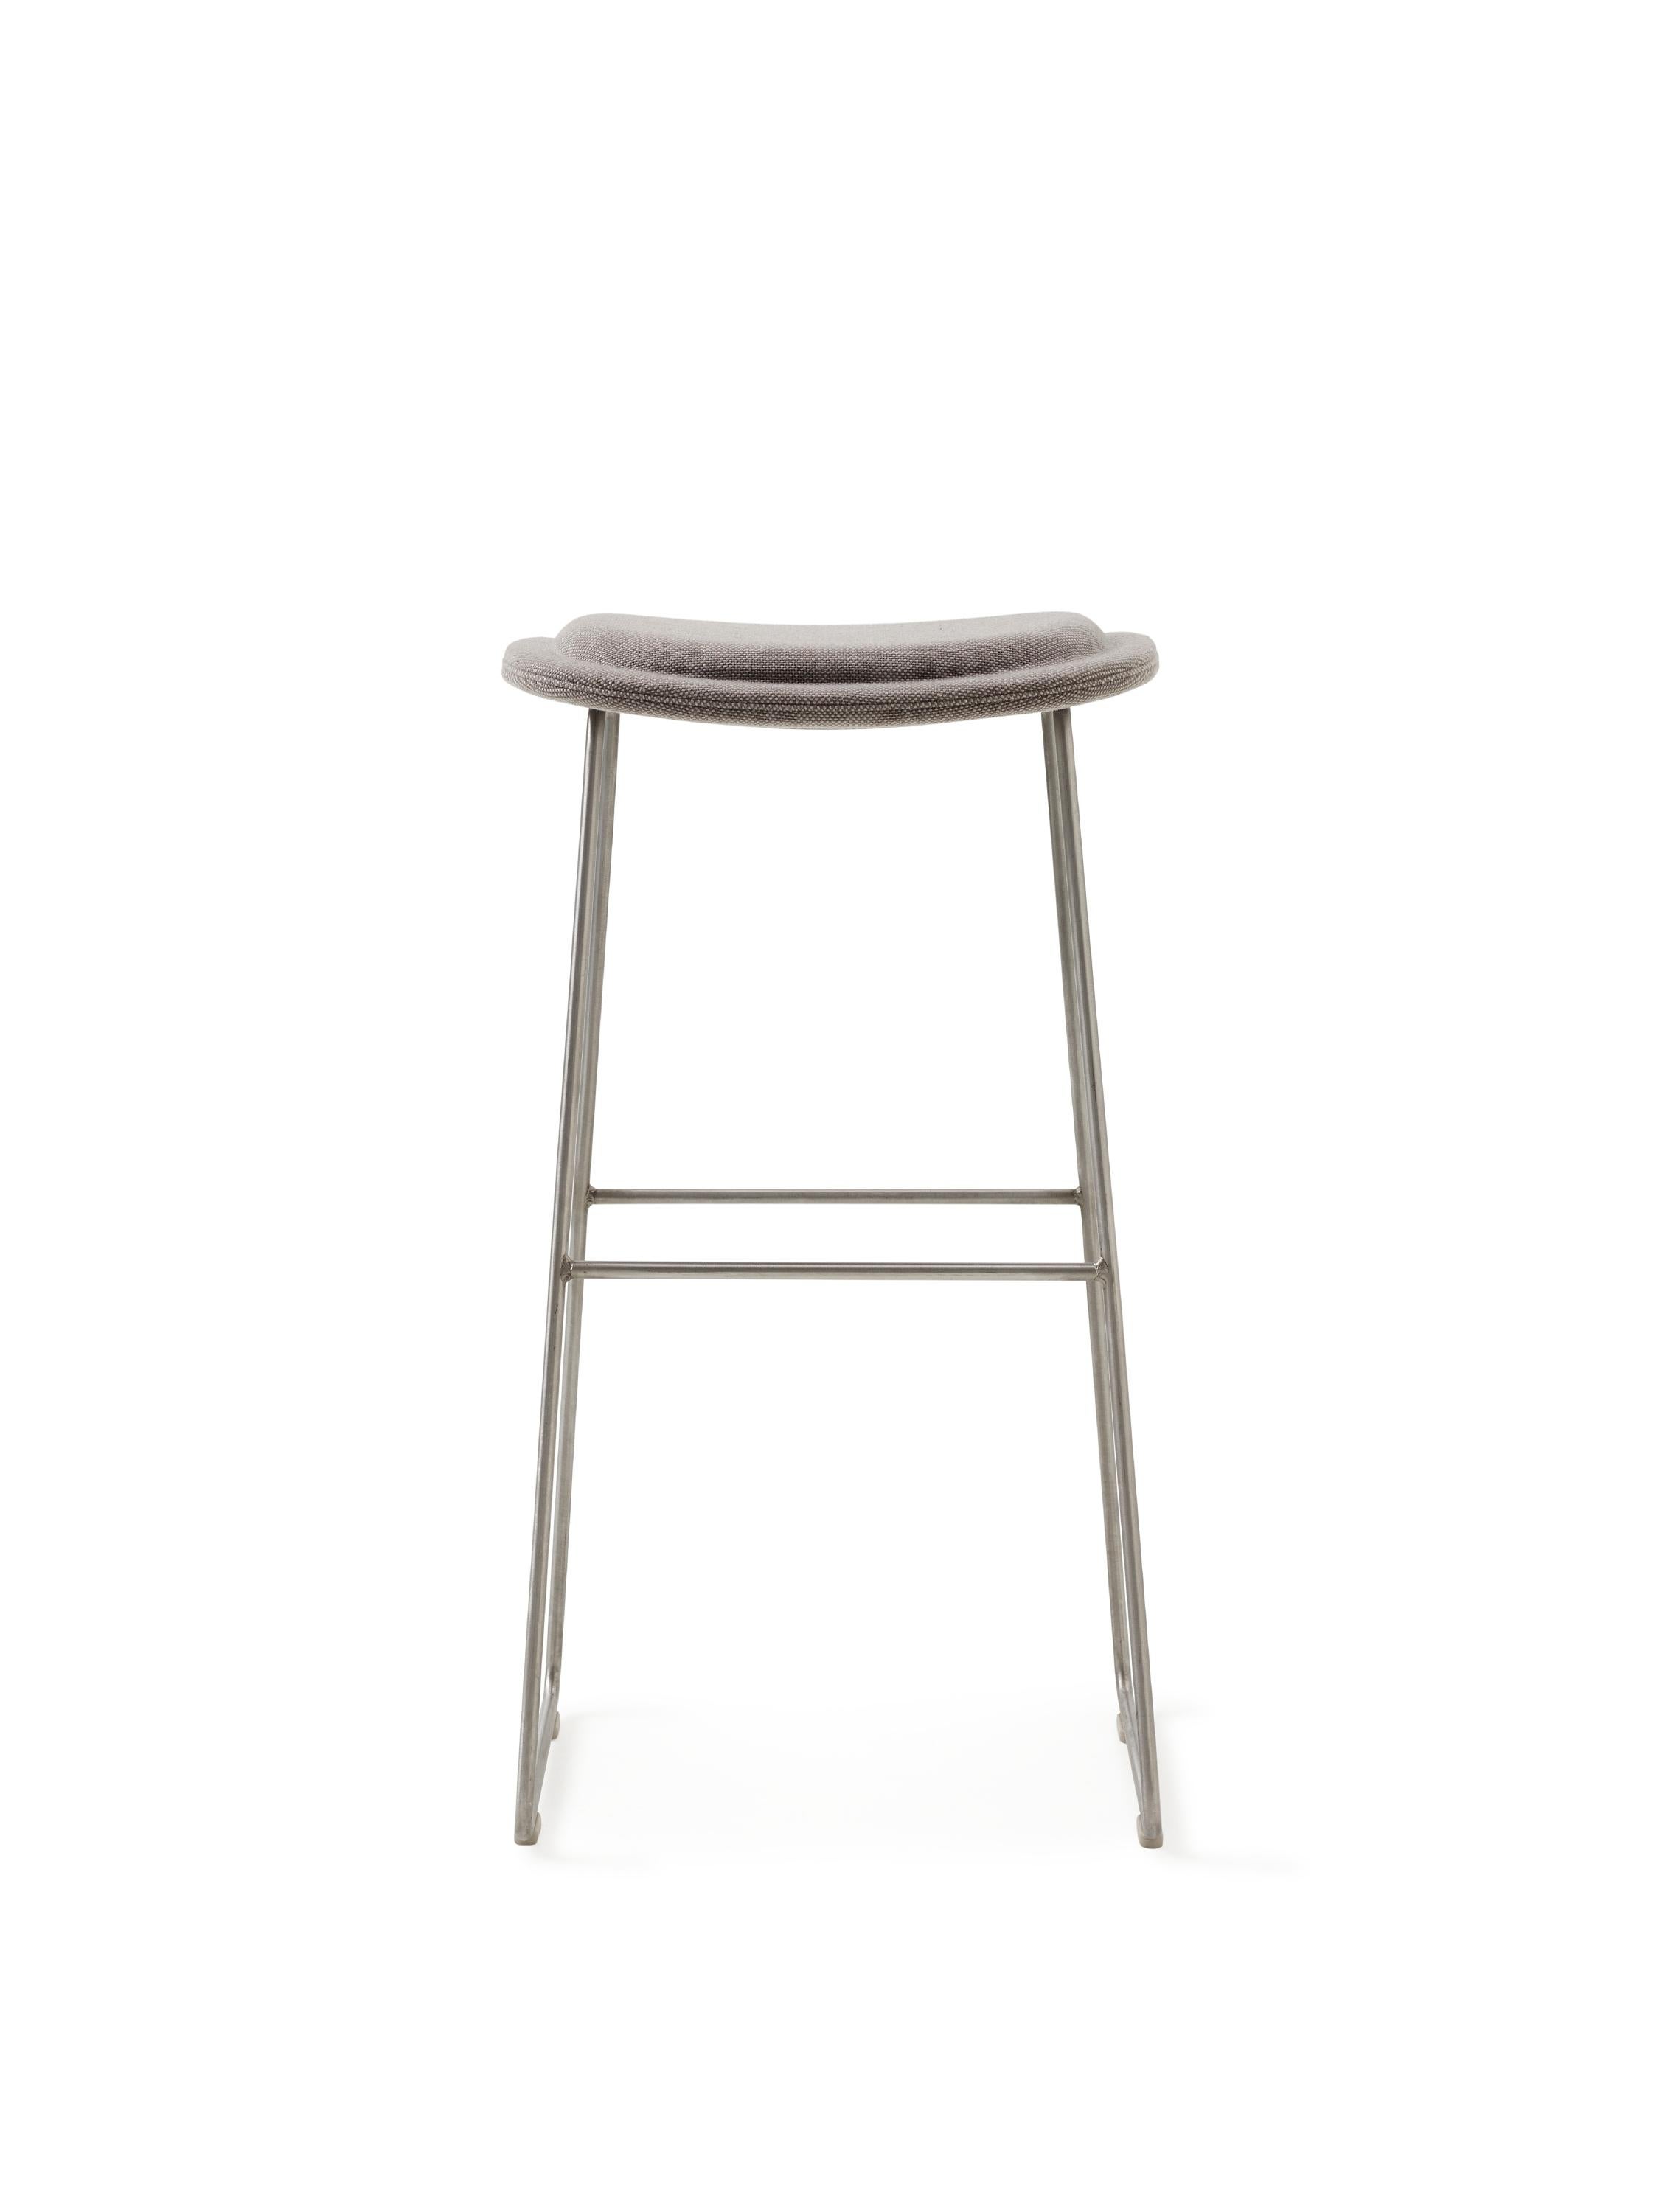 For Sale: Silver (Hallingdal 2 555) Jasper Morrison Small Hi Pad Stool in Fabric or Leather Upholstery by Cappellini 2